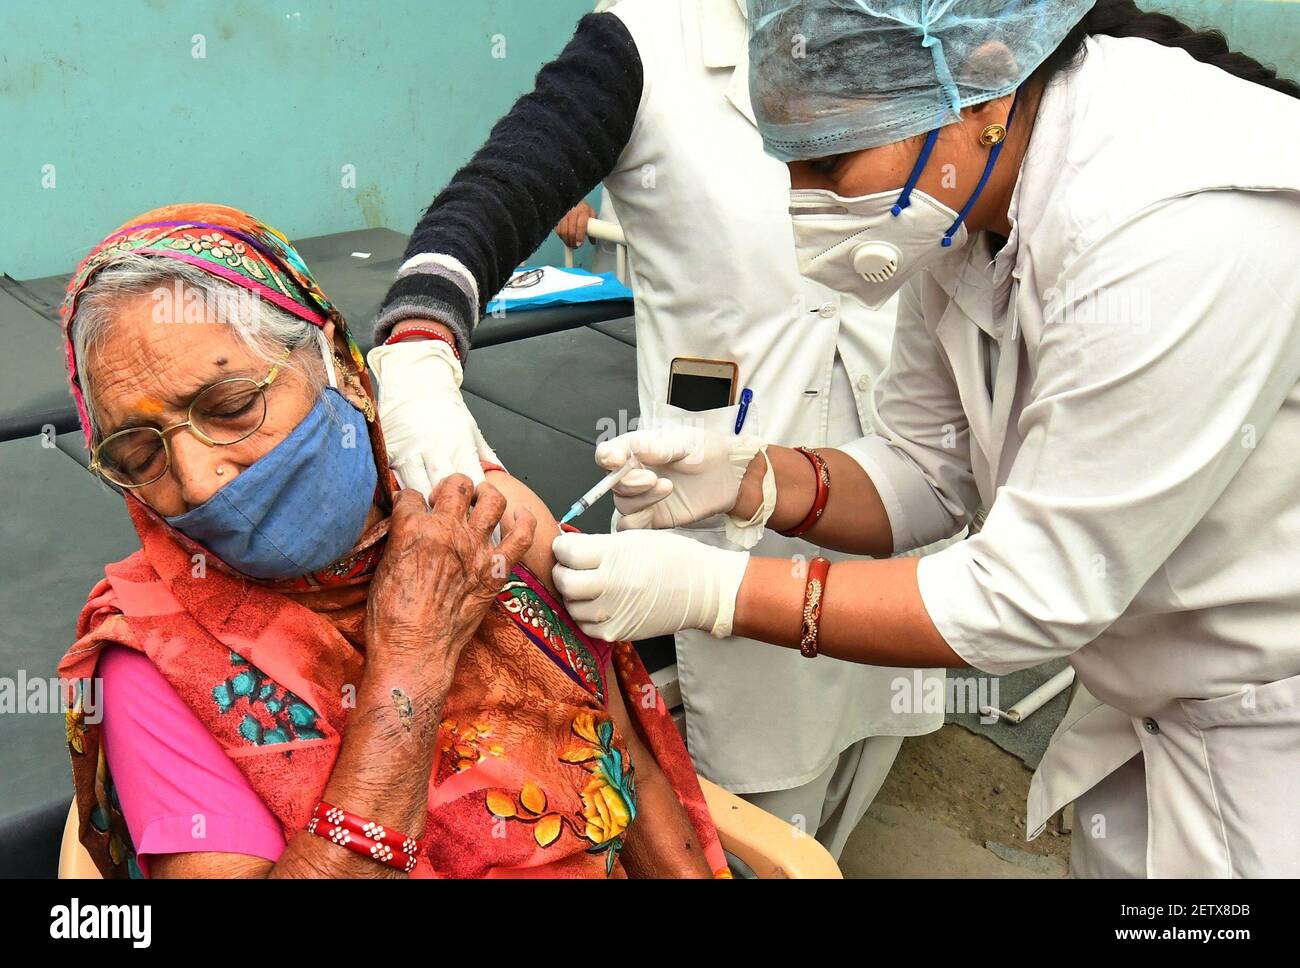 Beawar, India. 02nd Mar, 2021. An elderly woman being administered COVID-19 vaccine, during a countrywide inoculation drive, at Government hospital in Beawar. The second phase of the Covid-19 vaccination drive started for people 60 years of age and above. 70 years old Indian Prime Minister Narendra Modi also received his first dose of Corona vaccine at AIIMS in New Delhi on Monday. (Photo by Sumit Saraswat/Pacific Press) Credit: Pacific Press Media Production Corp./Alamy Live News Stock Photo